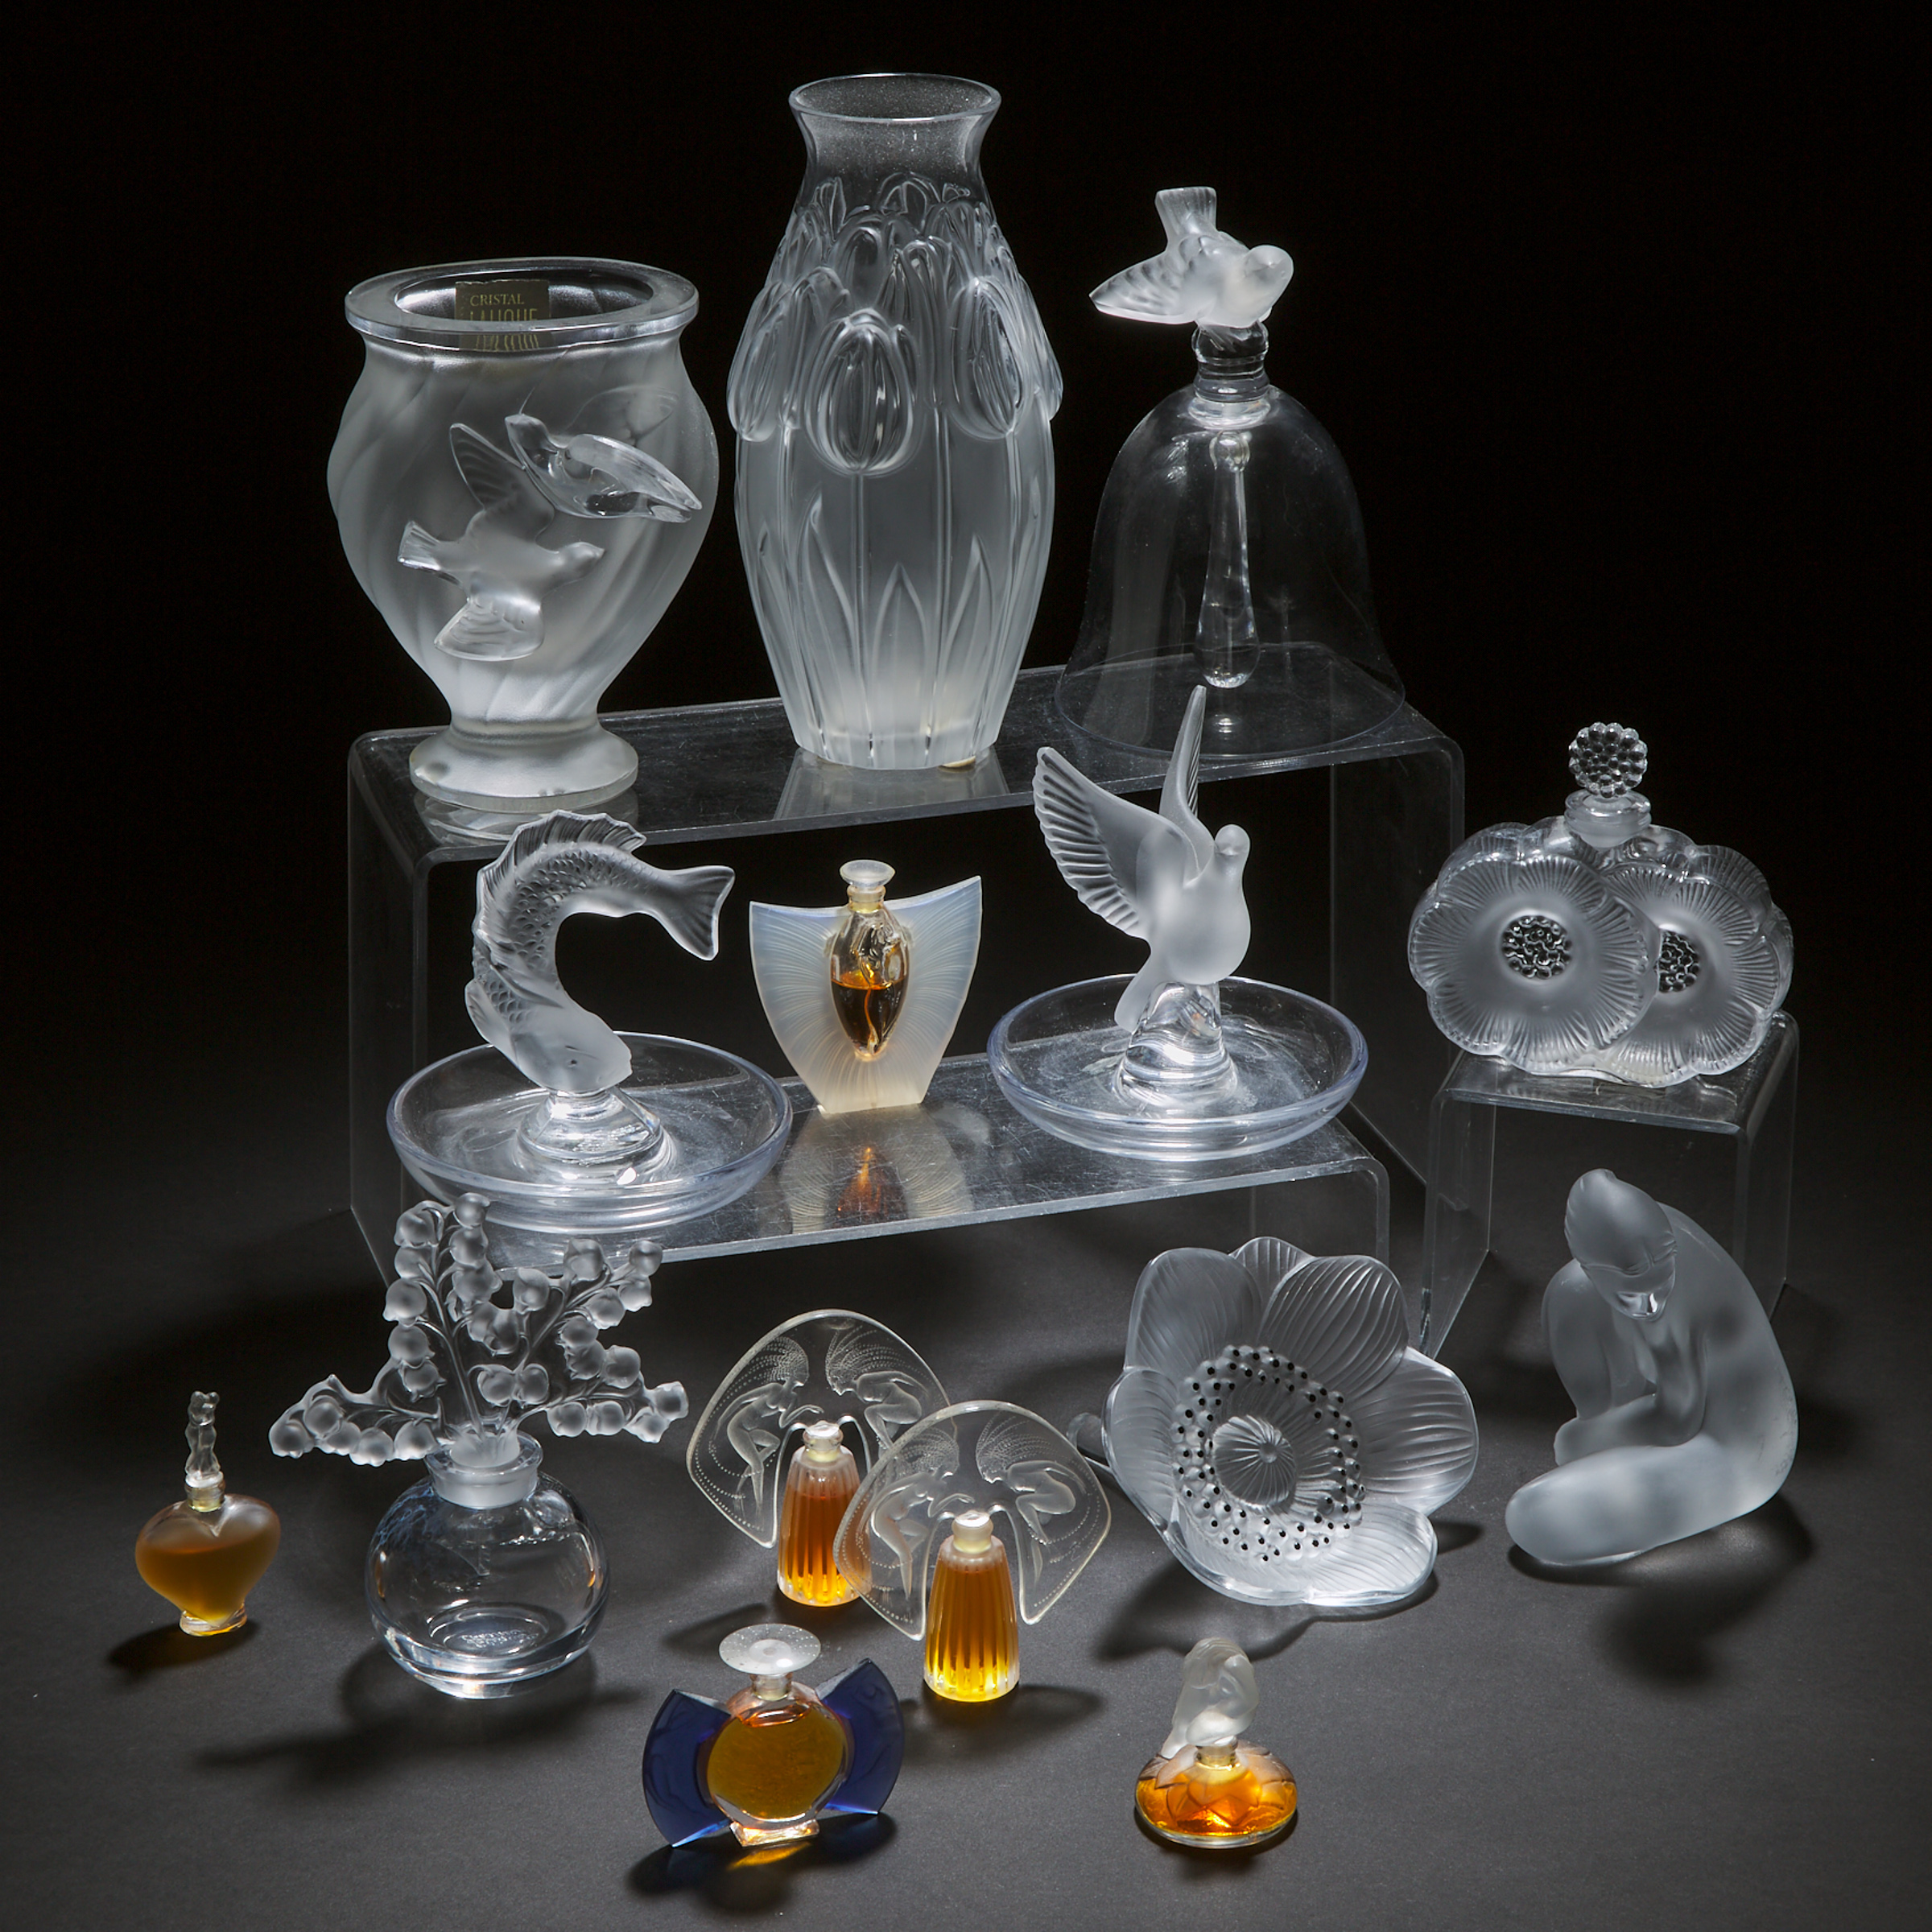 Group of Lalique Moulded and Frosted Glass Objects, 20th century